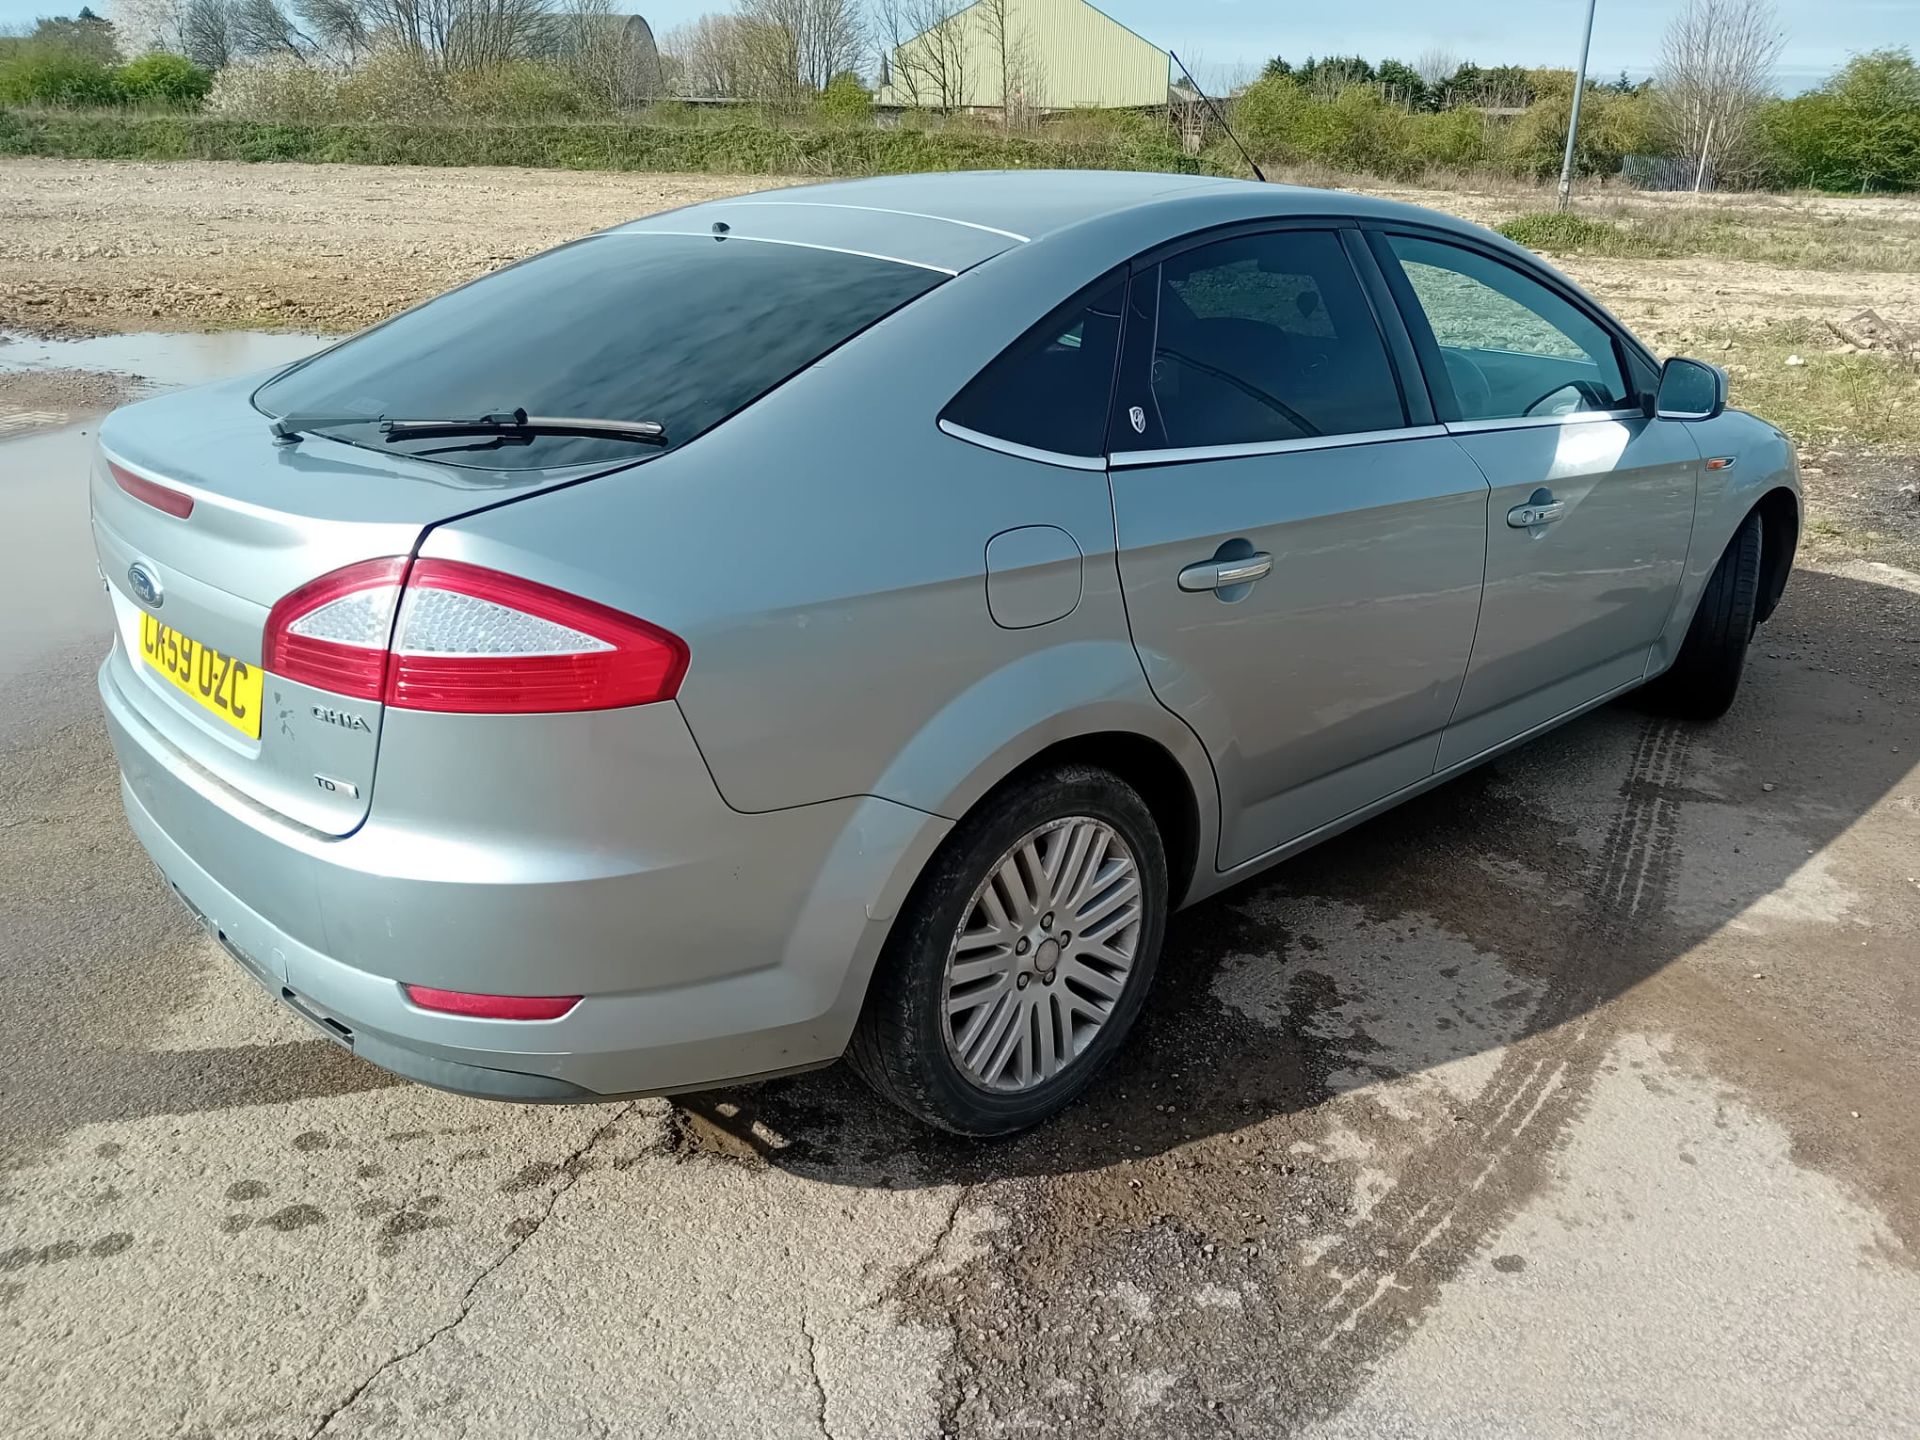 Ford Mondeo - Image 2 of 13